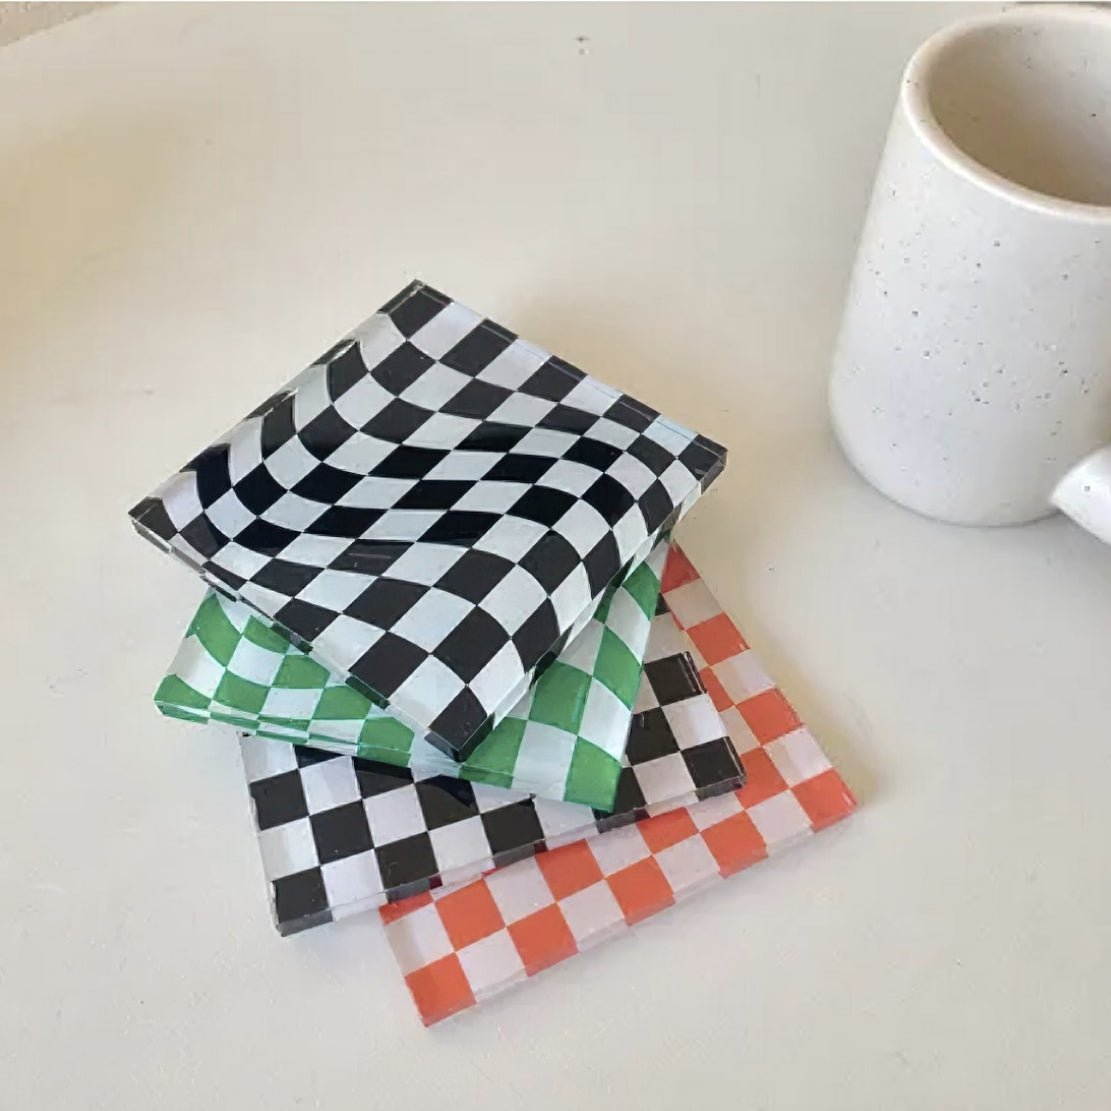 Groovy, checkerboard pattern acrylic, square shape cup coasters